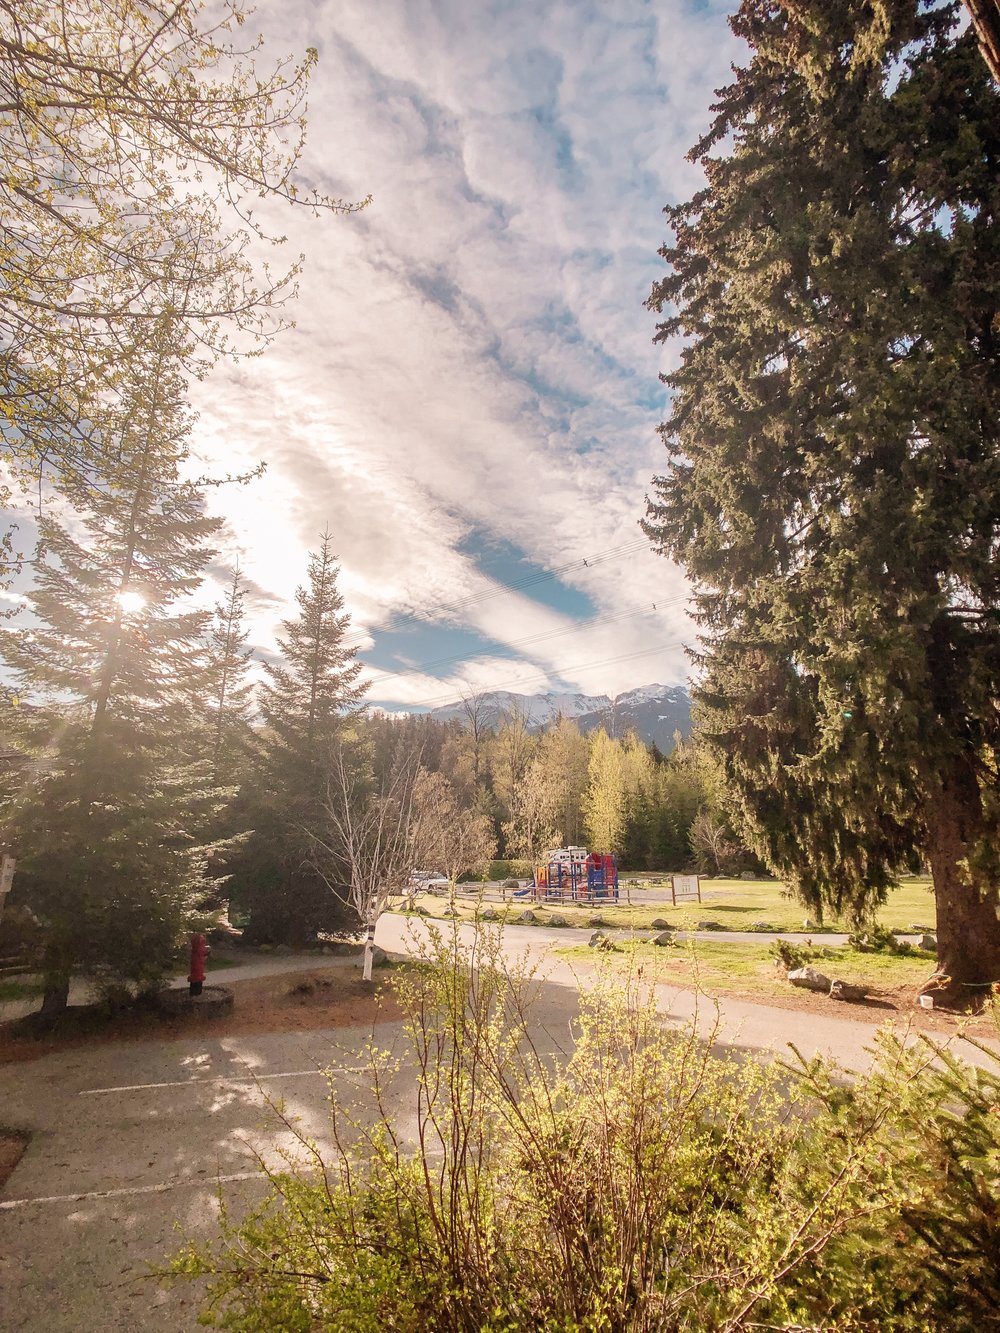 Awesome activities and fun things to do for kids in Whistler Canada campground